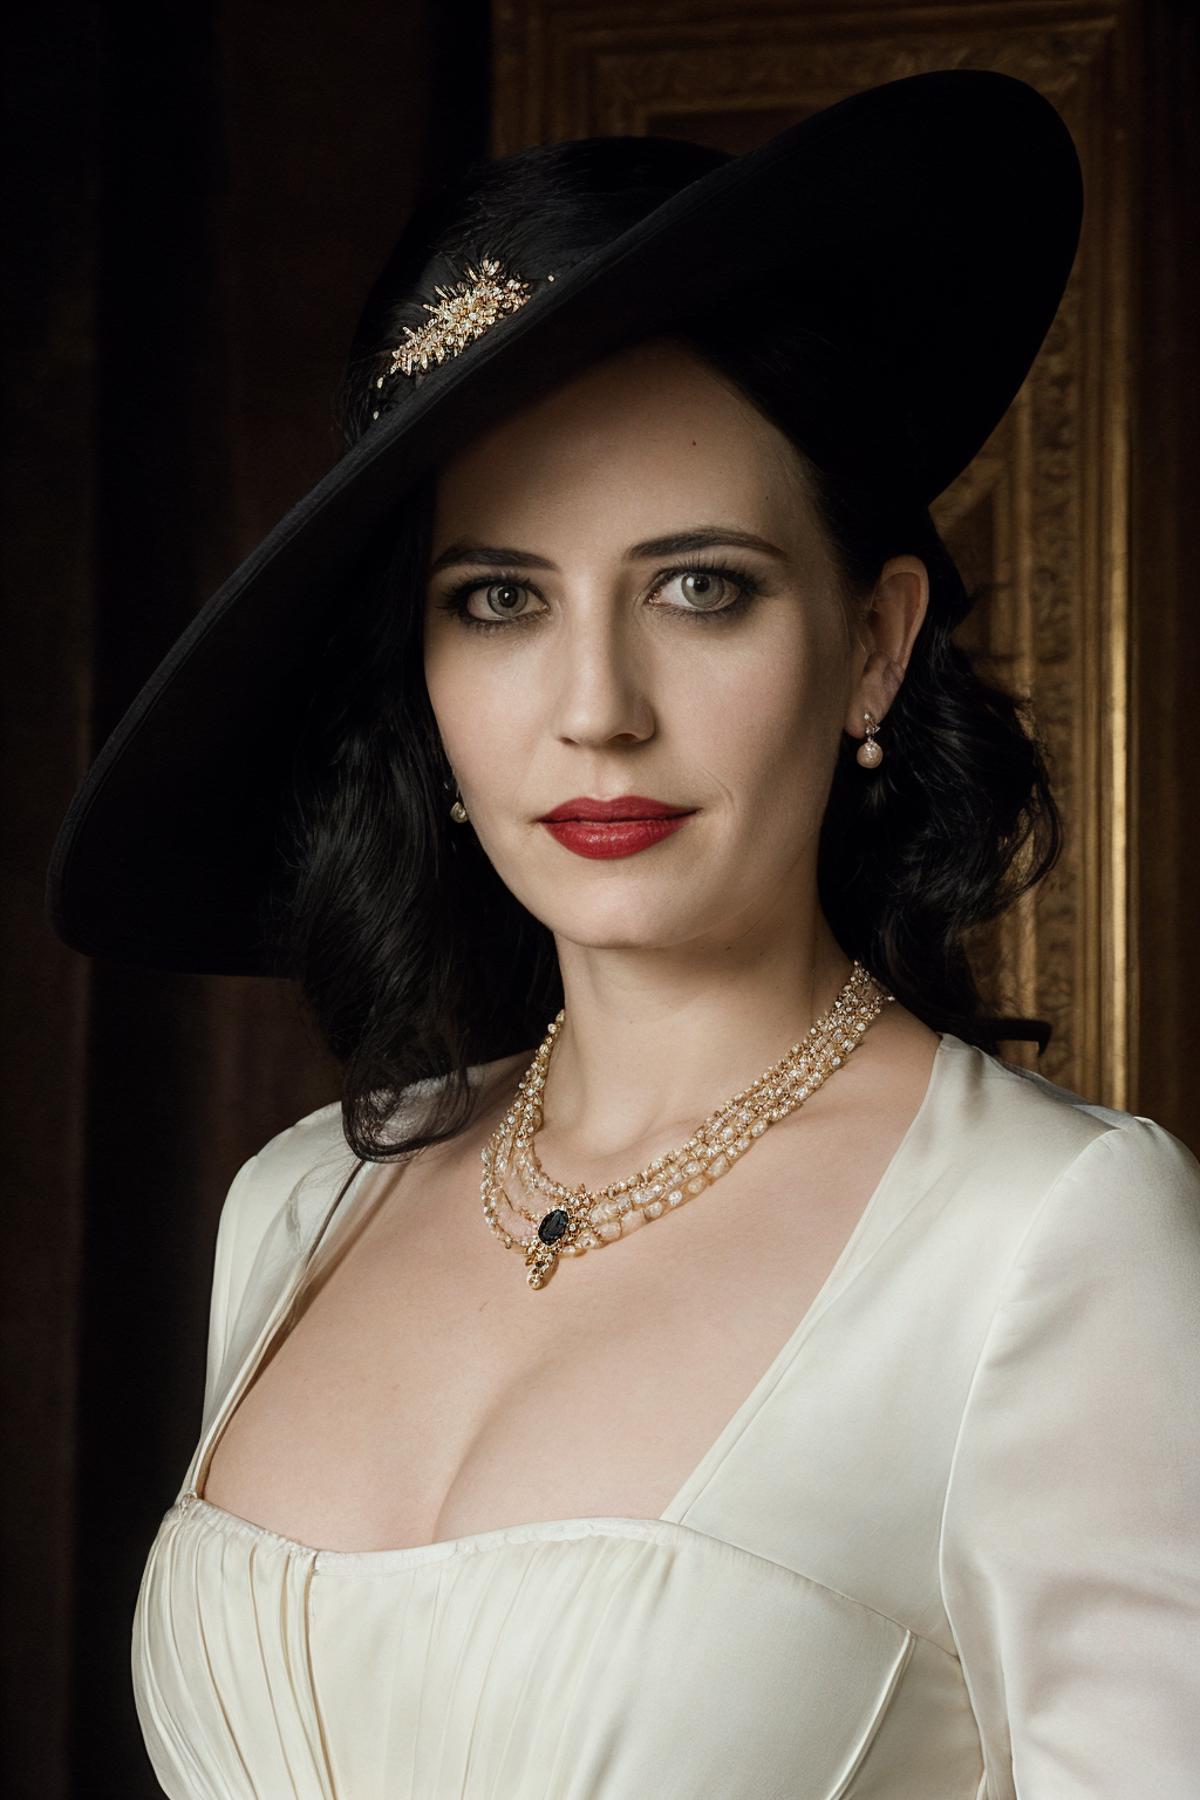 Eva Green image by lucnl123